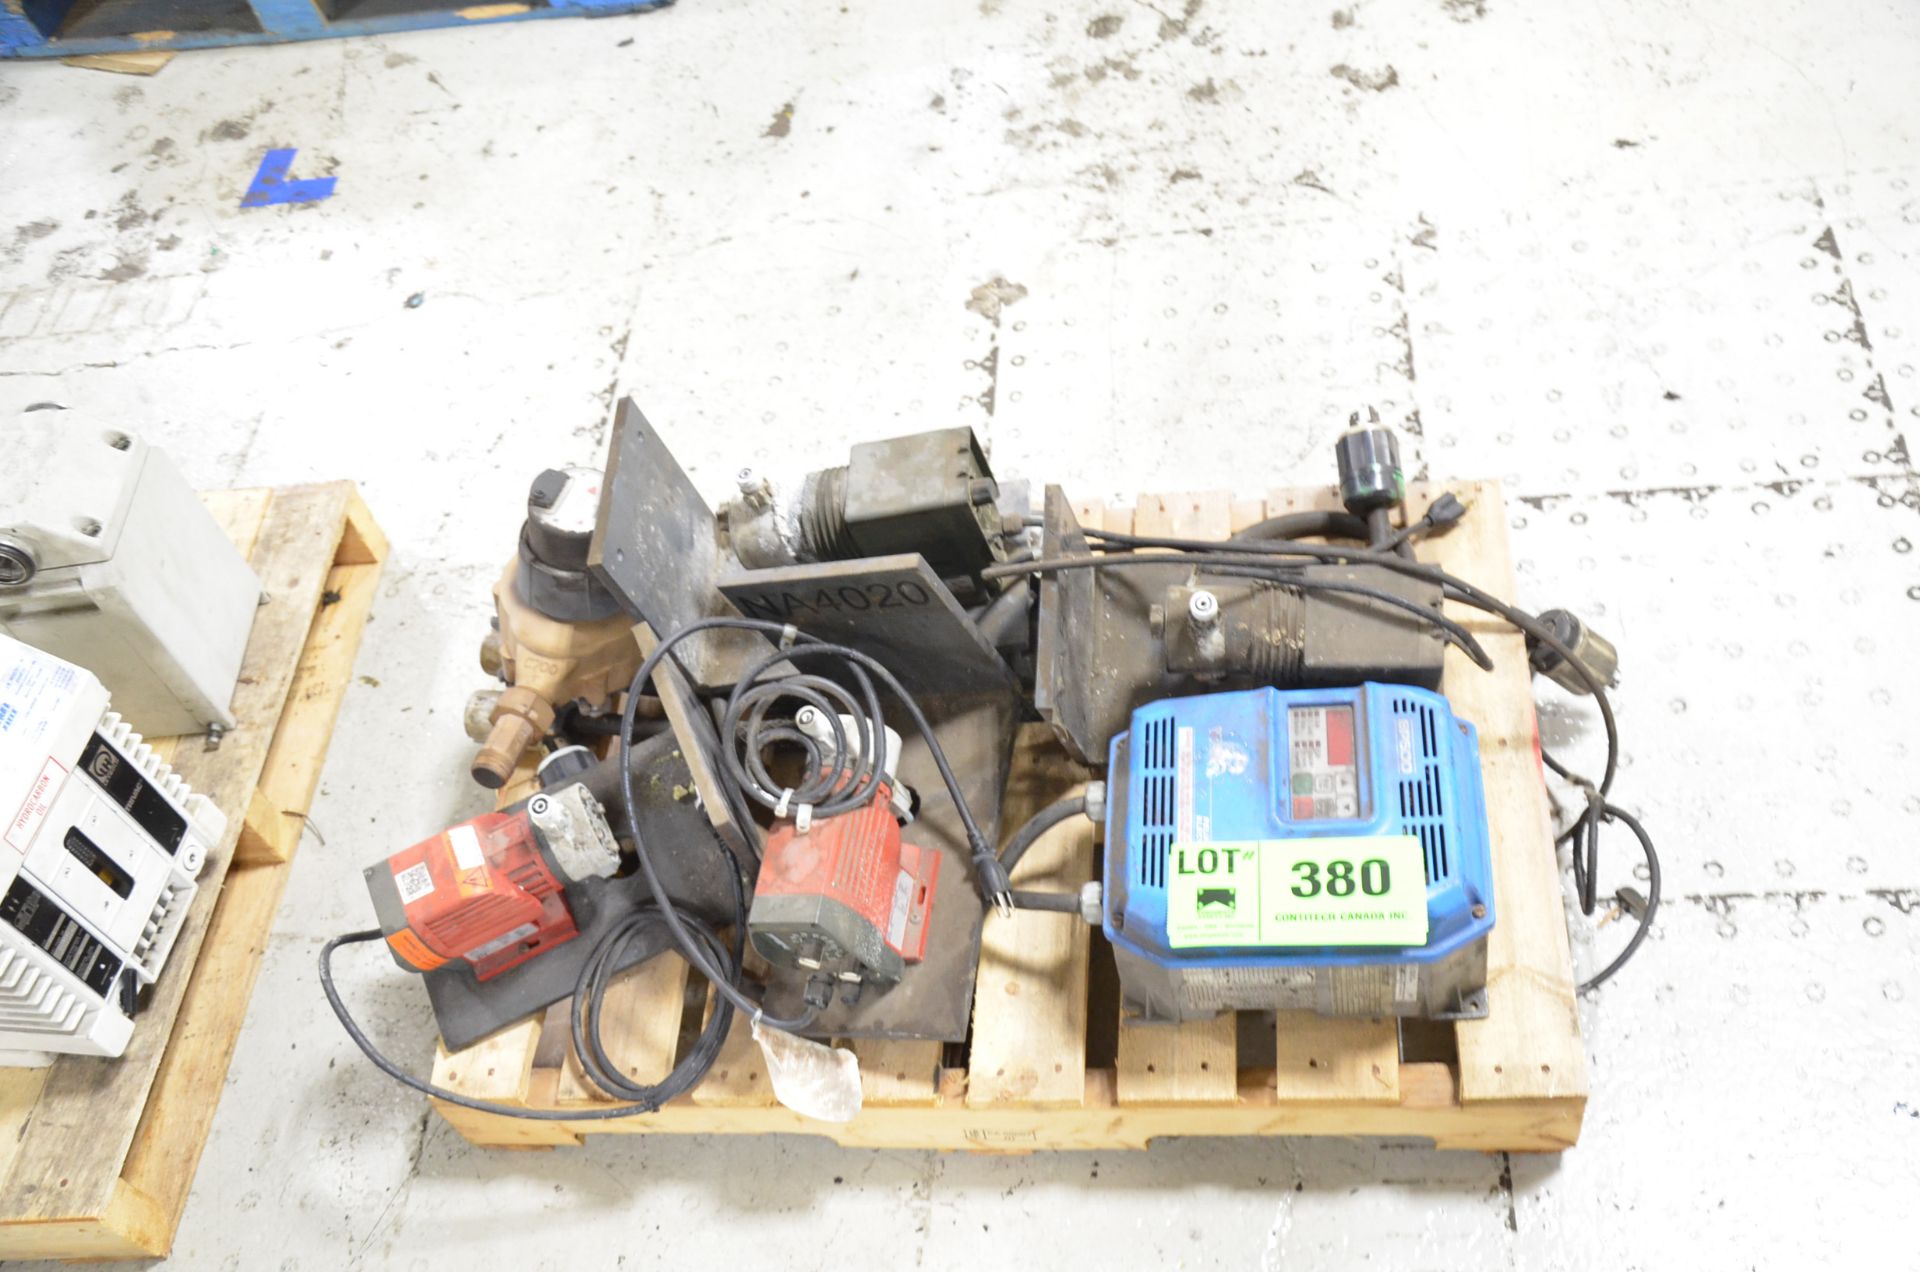 LOT/ DIGITAL METERING PUMPS AND RELIANCE VFD DRIVE [RIGGING FEE FOR LOT #380 - $25 USD PLUS